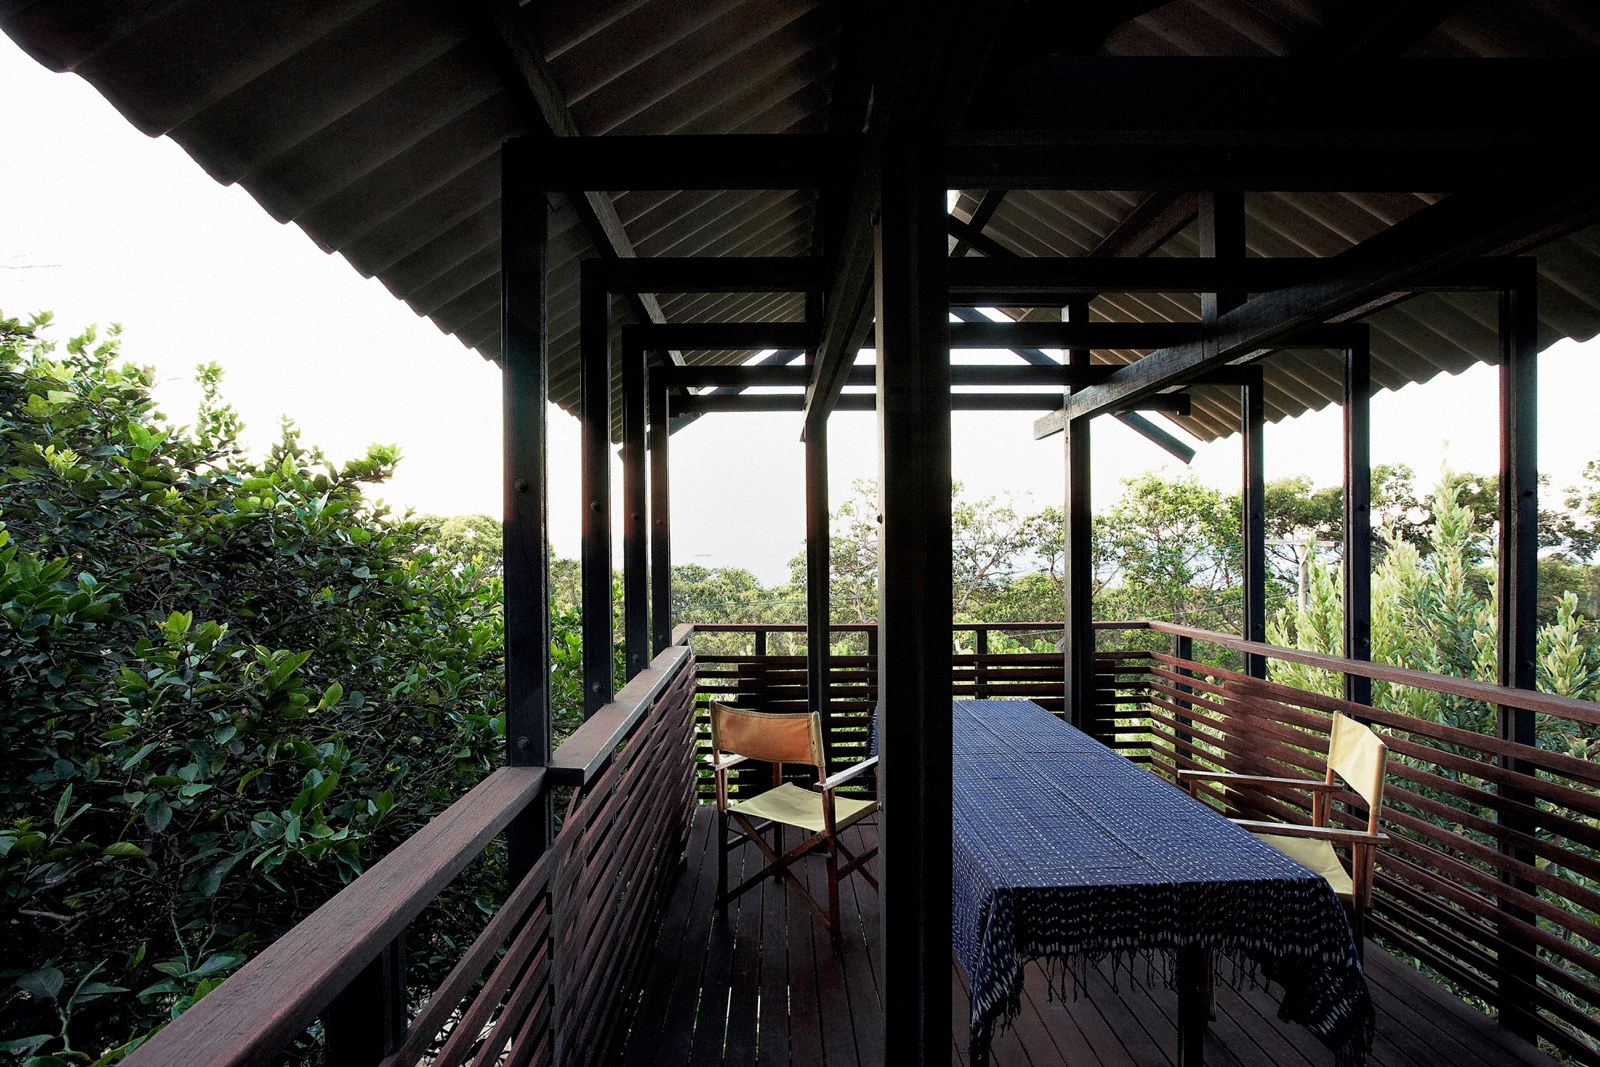 This is a photograph of a table and chairs sitting on the timber decking of the belvedere of the Mooloomba House. It has timber balustrades and a corrugated roof.